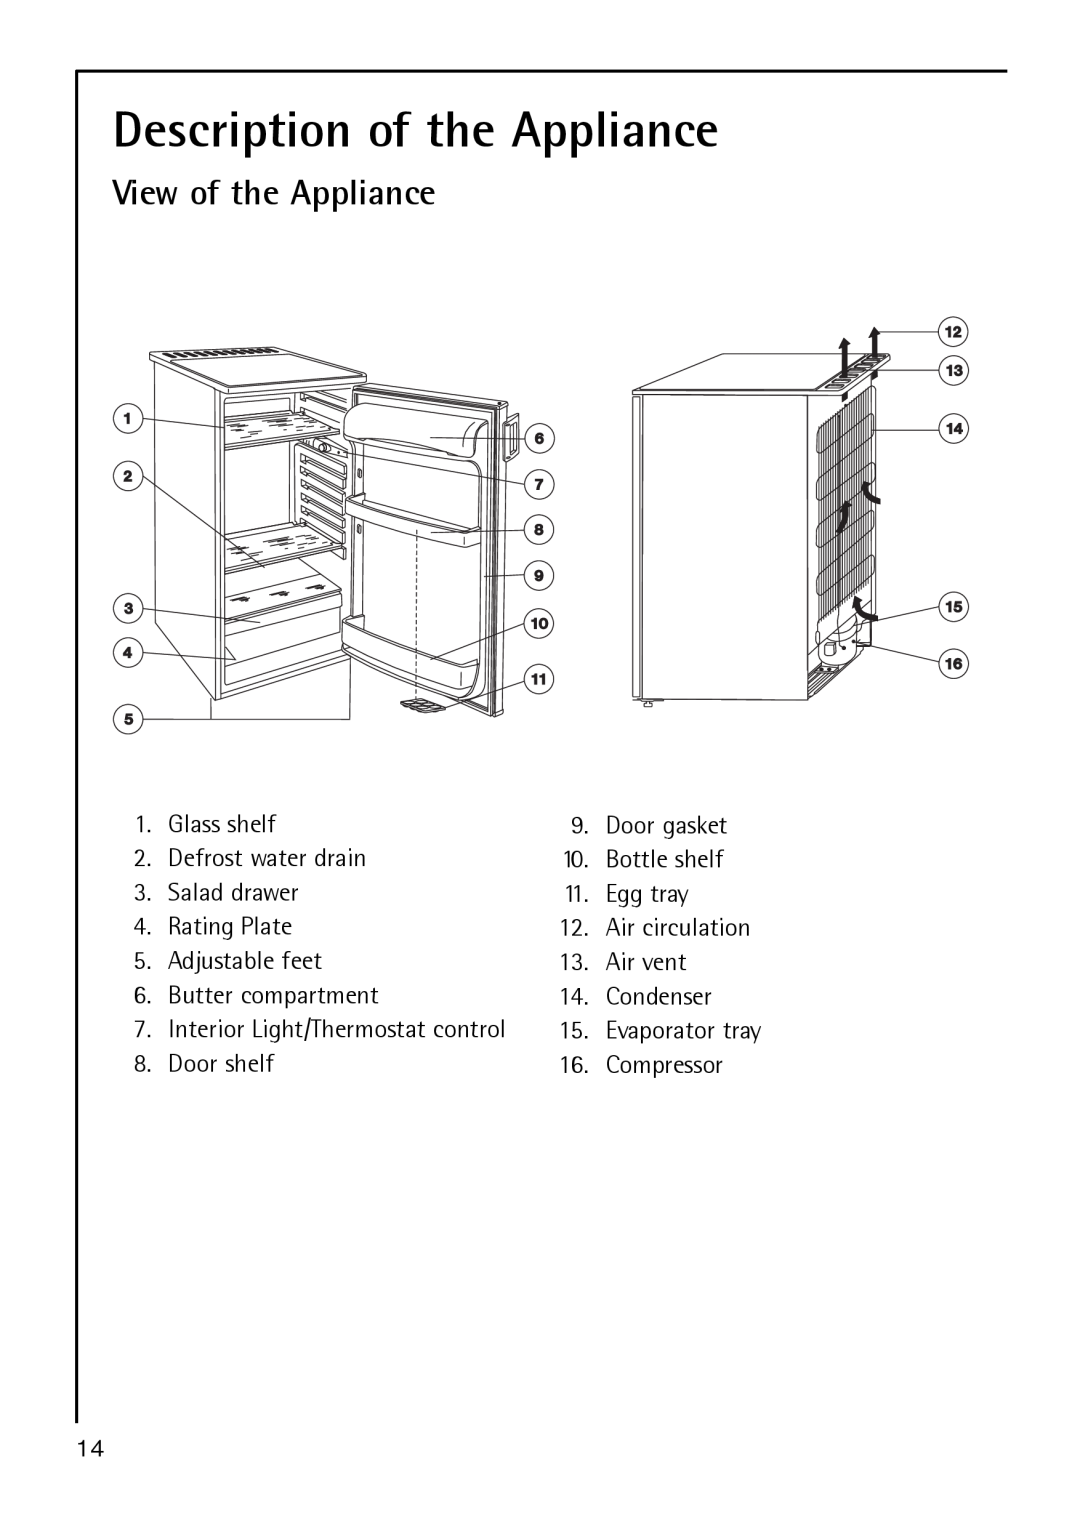 AEG S 60150 TK manual Description of the Appliance, View of the Appliance 